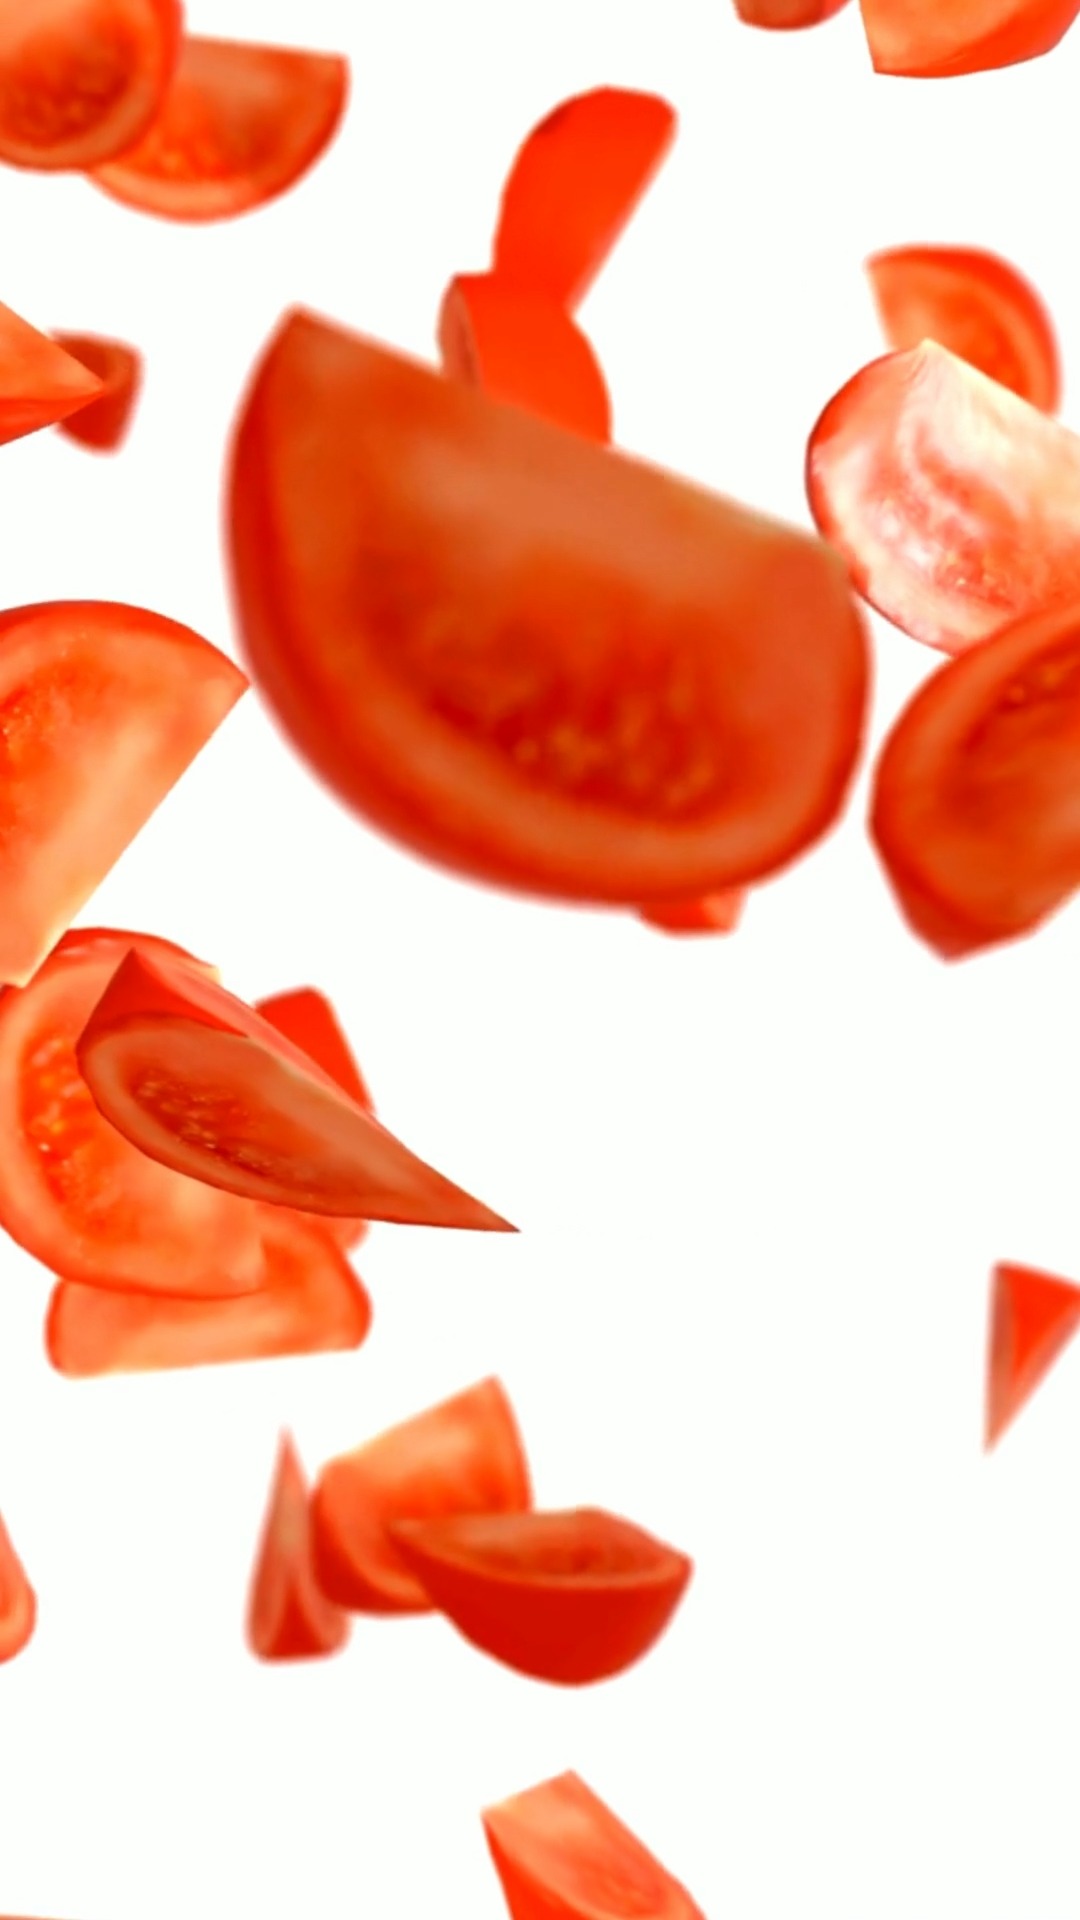 molho_tomate_video1-2-poster